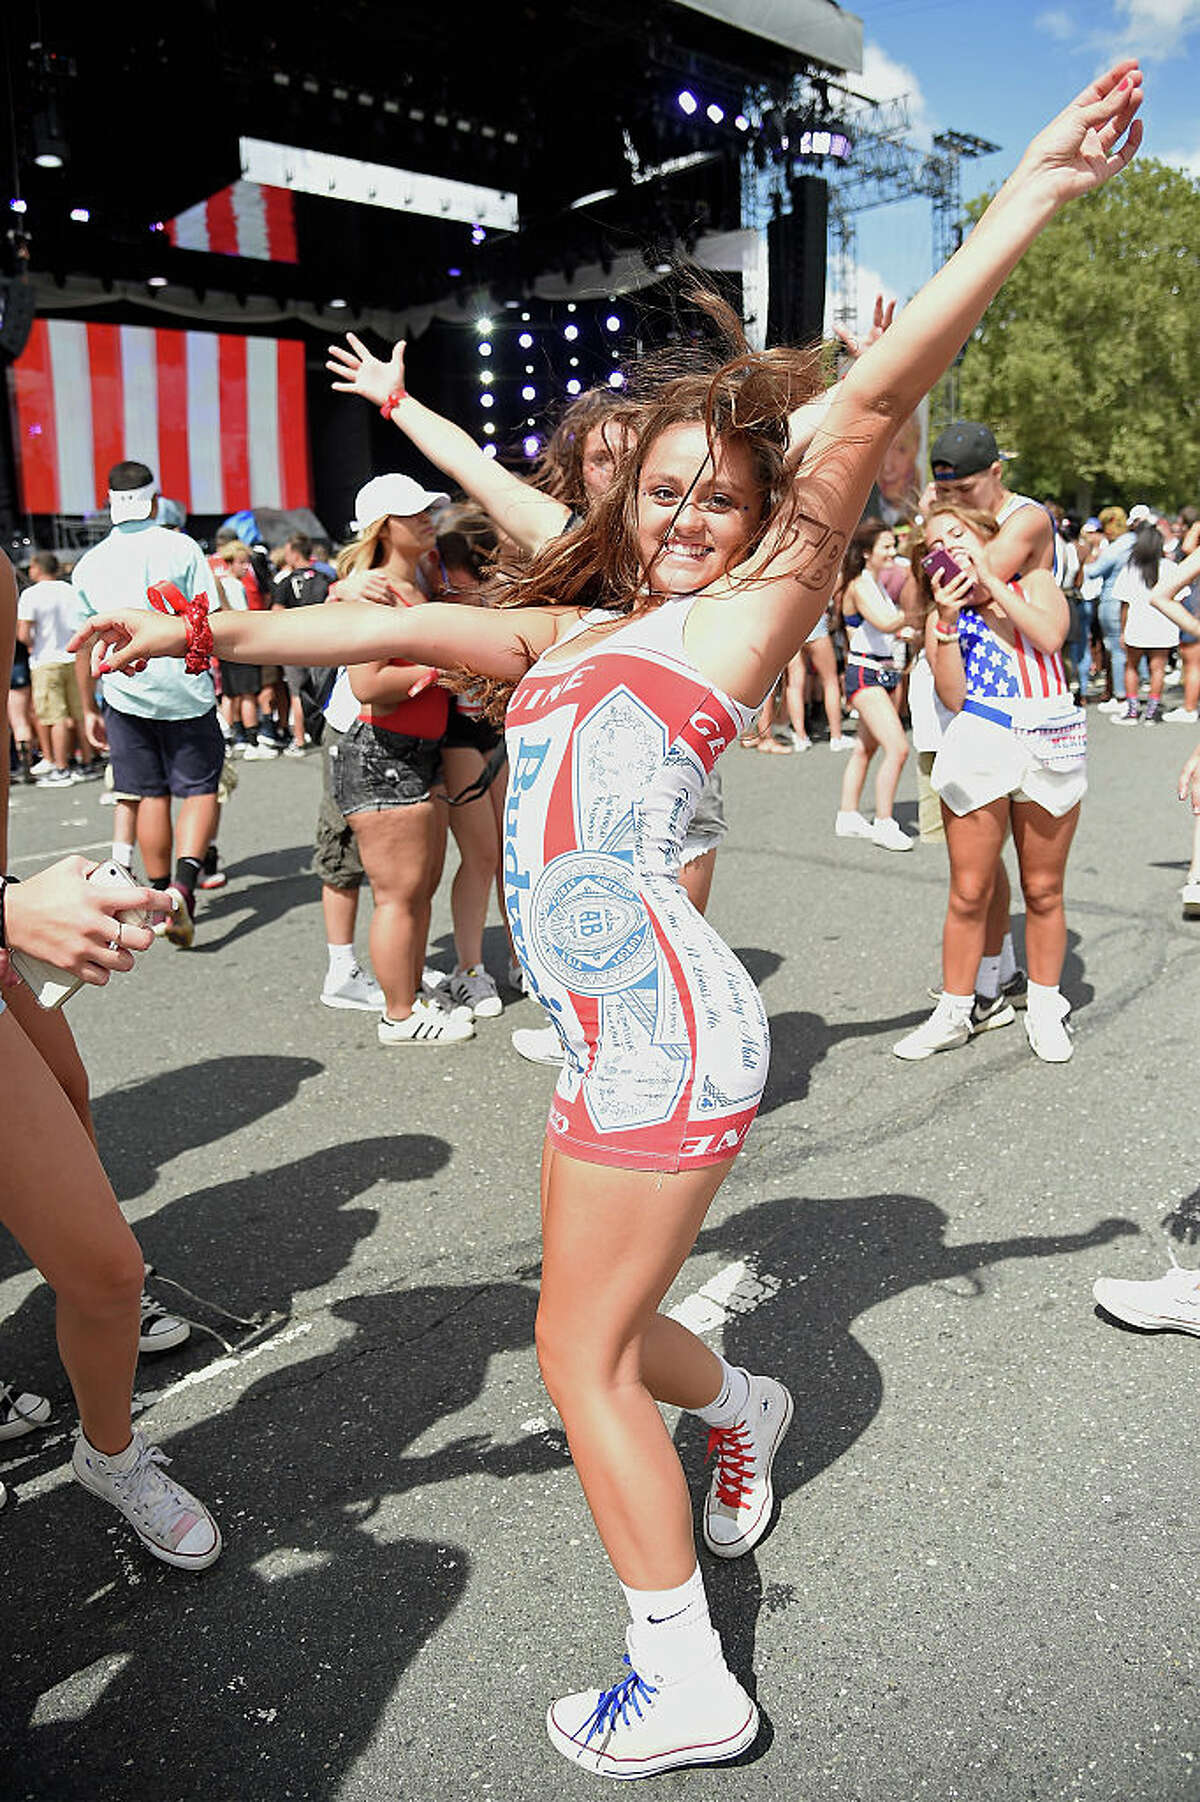 A fan in a Budweiser dress dances during the 2016 Budweiser Made in America Festival at Benjamin Franklin Parkway on September 3, 2016 in Philadelphia, Pennsylvania. (Photo by Kevin Mazur/Getty Images for Anheuser-Busch)